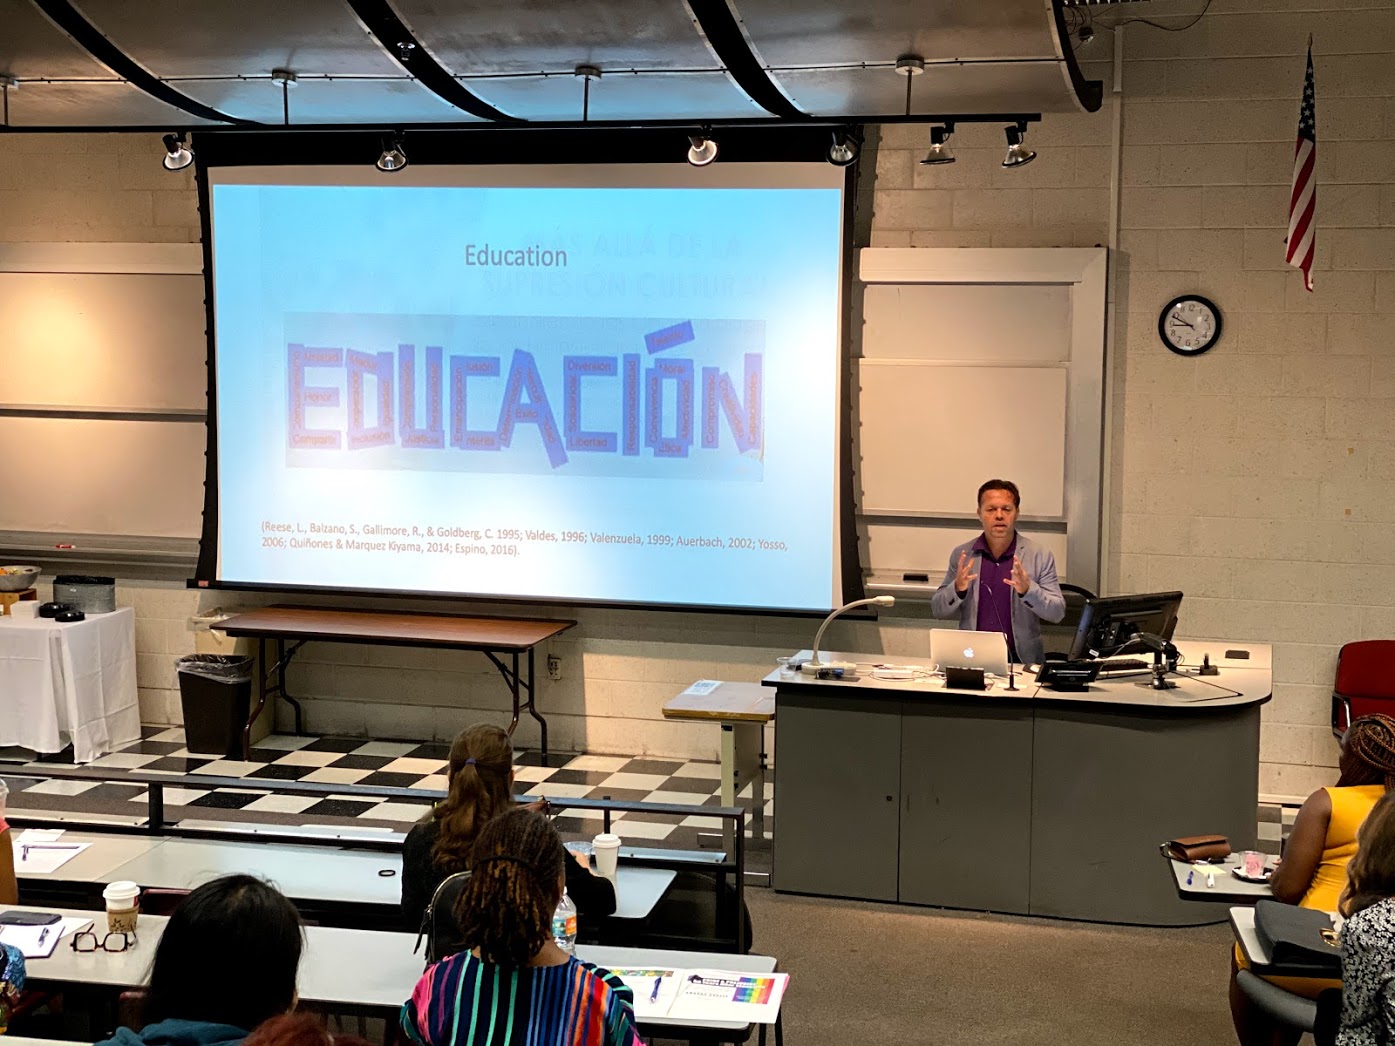 Andrés Ramírez, Co-Chair of FAU’s Hispanic Serving Institute Research Interest Group welcomes the audience with an overview of the concept of “Educación” – a Latin-centered view of Education.